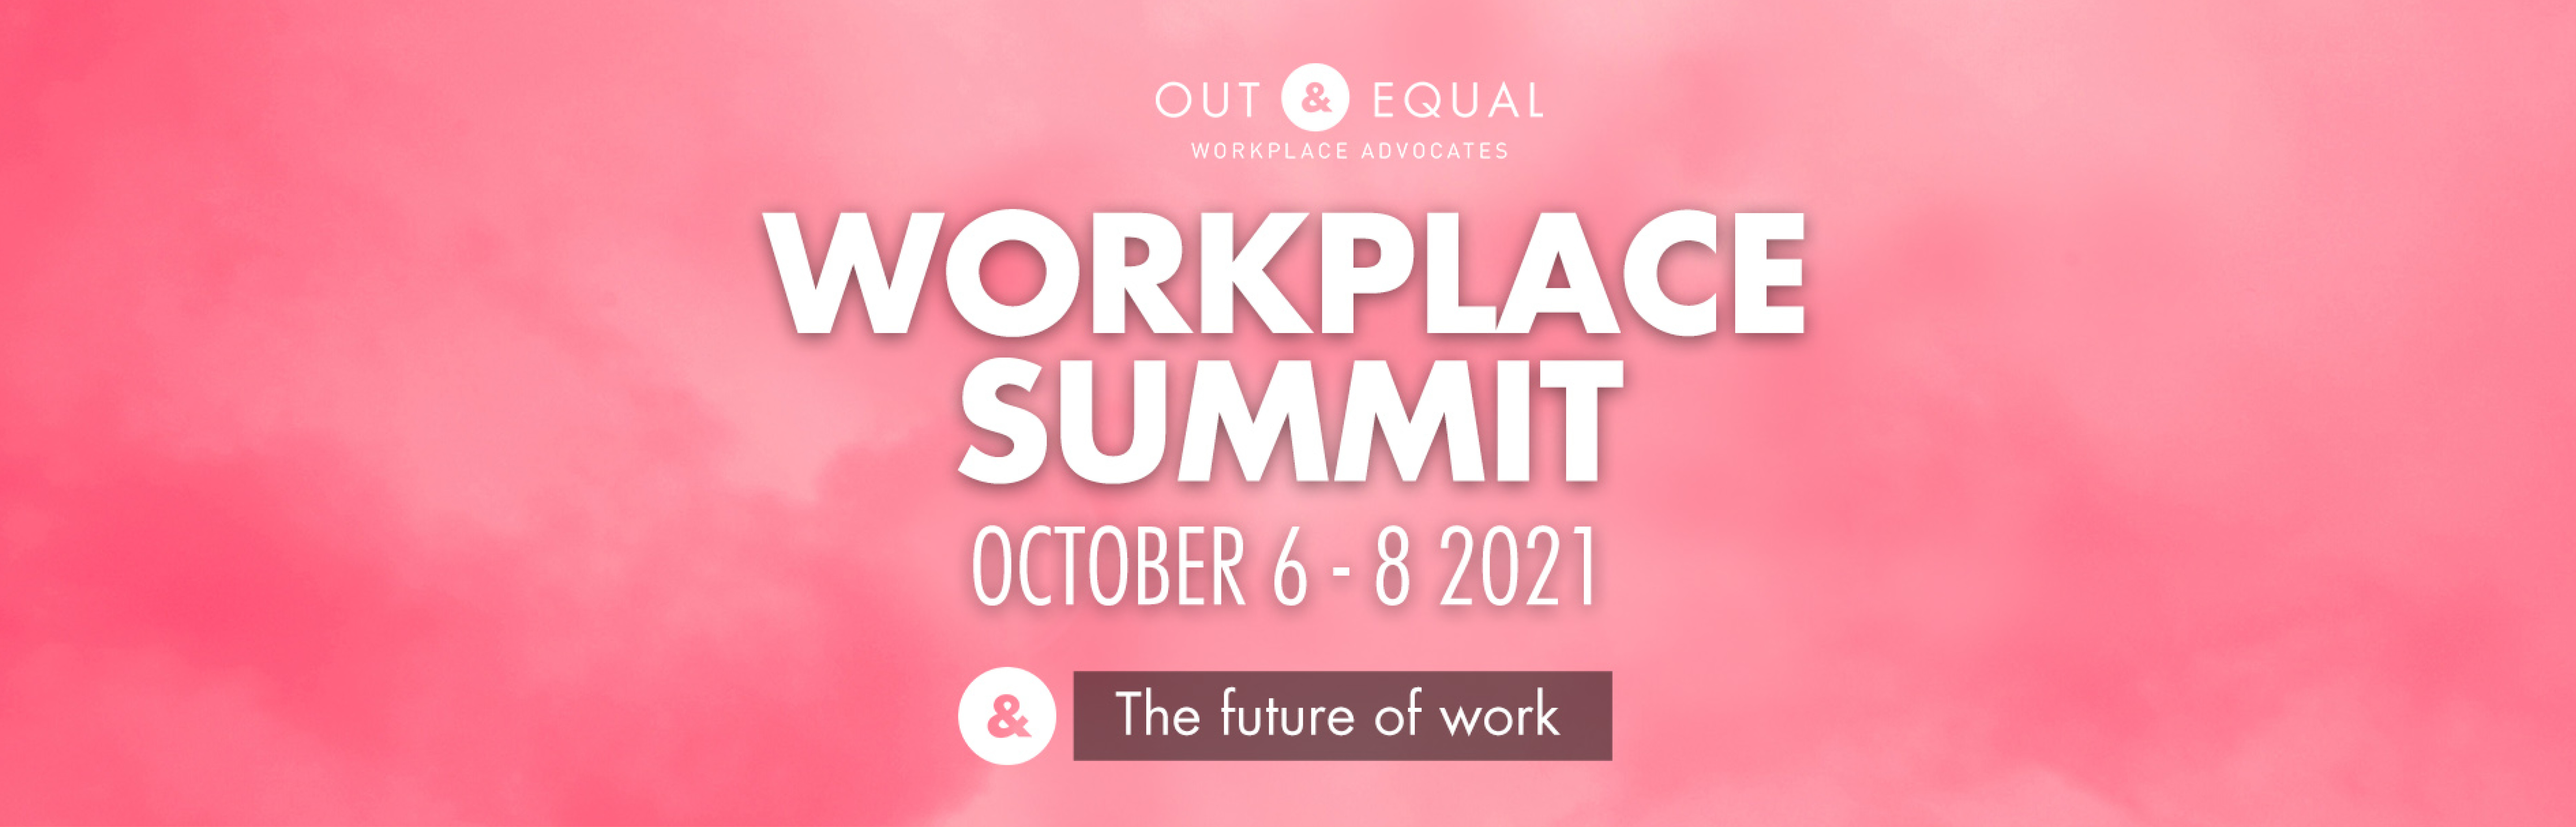 2021 Out & Equal Workplace Summit 